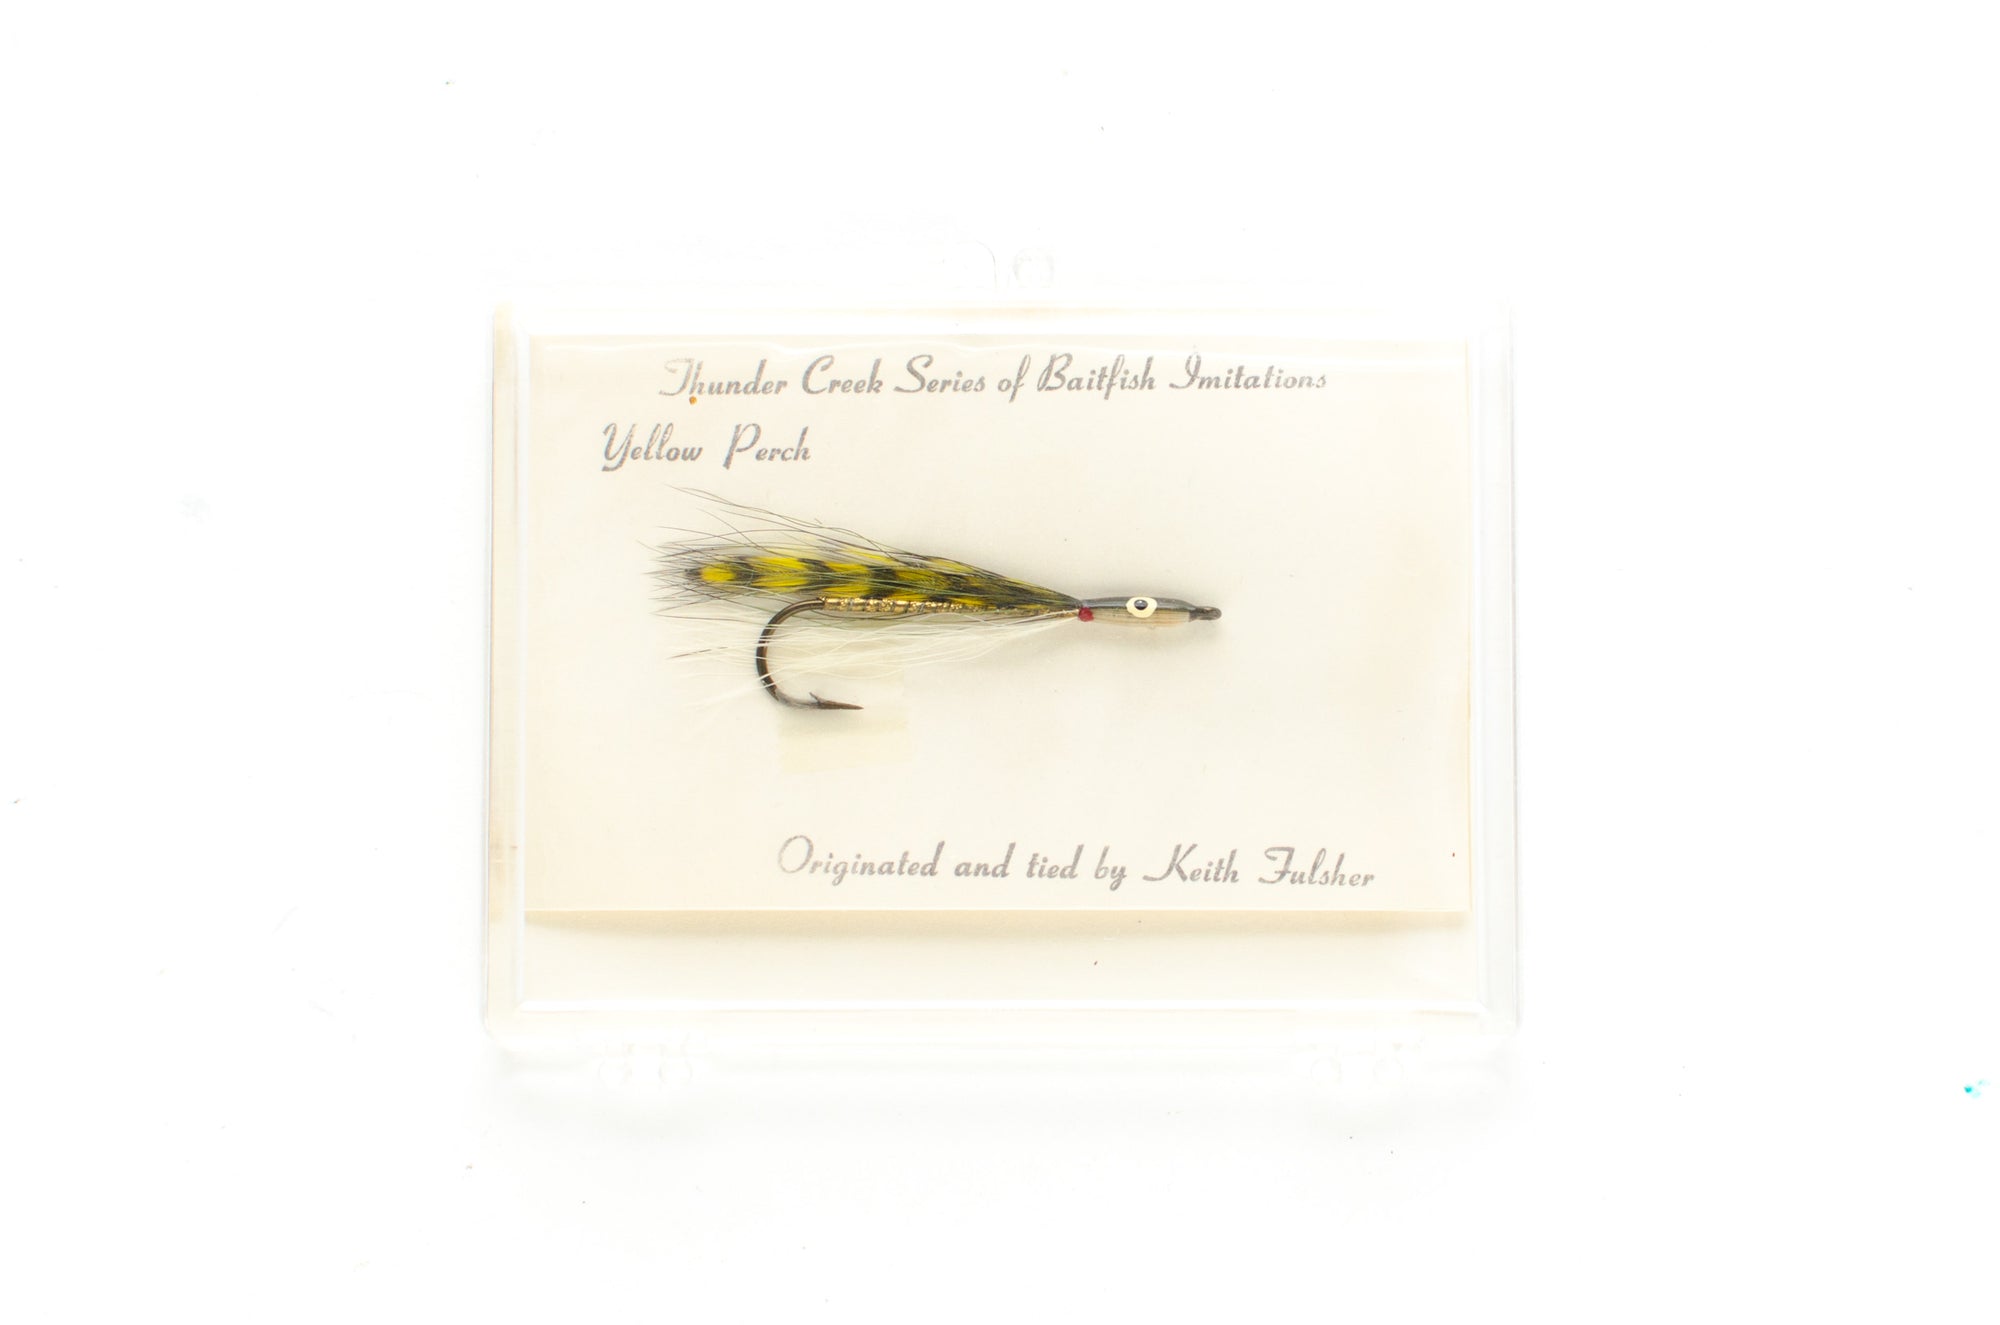 Yellow Perch fly by Keith Fulsher